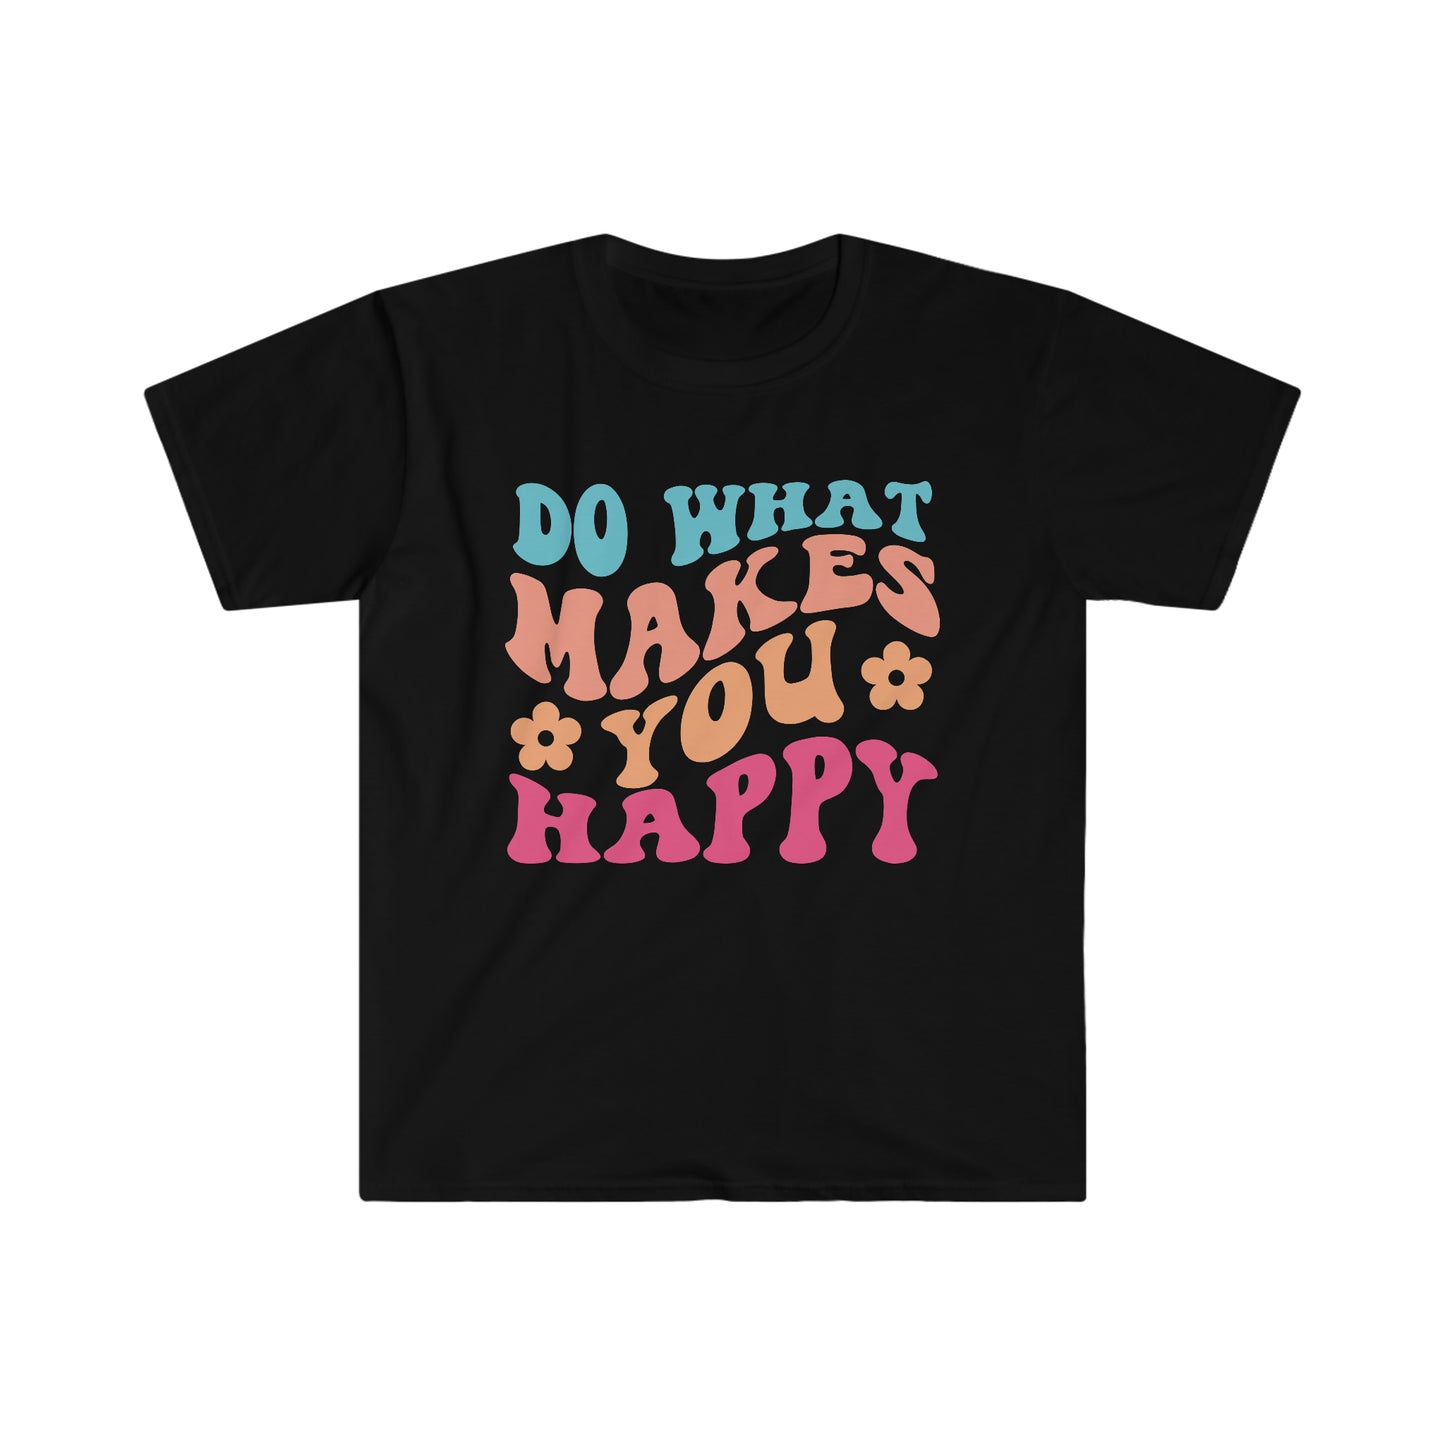 Do what makes you happy - Unisex Softstyle T-Shirt